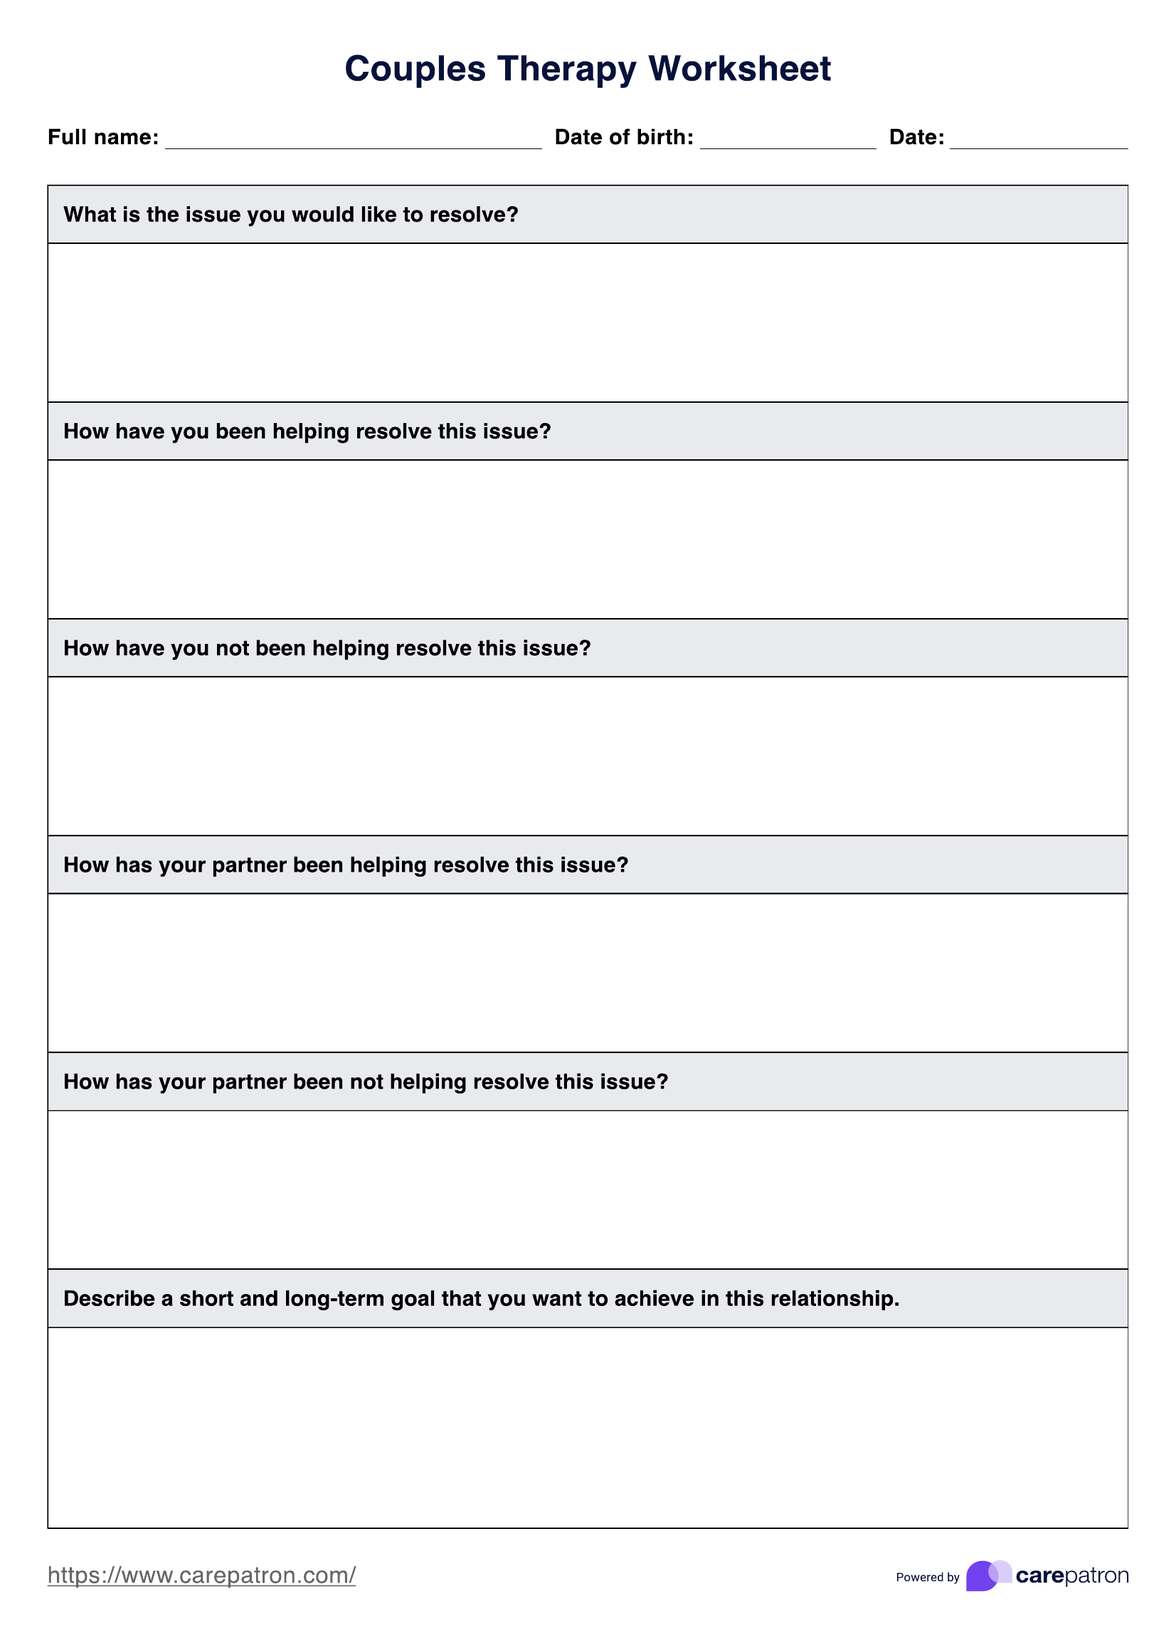 Couples Therapy Worksheet Template PDF Example